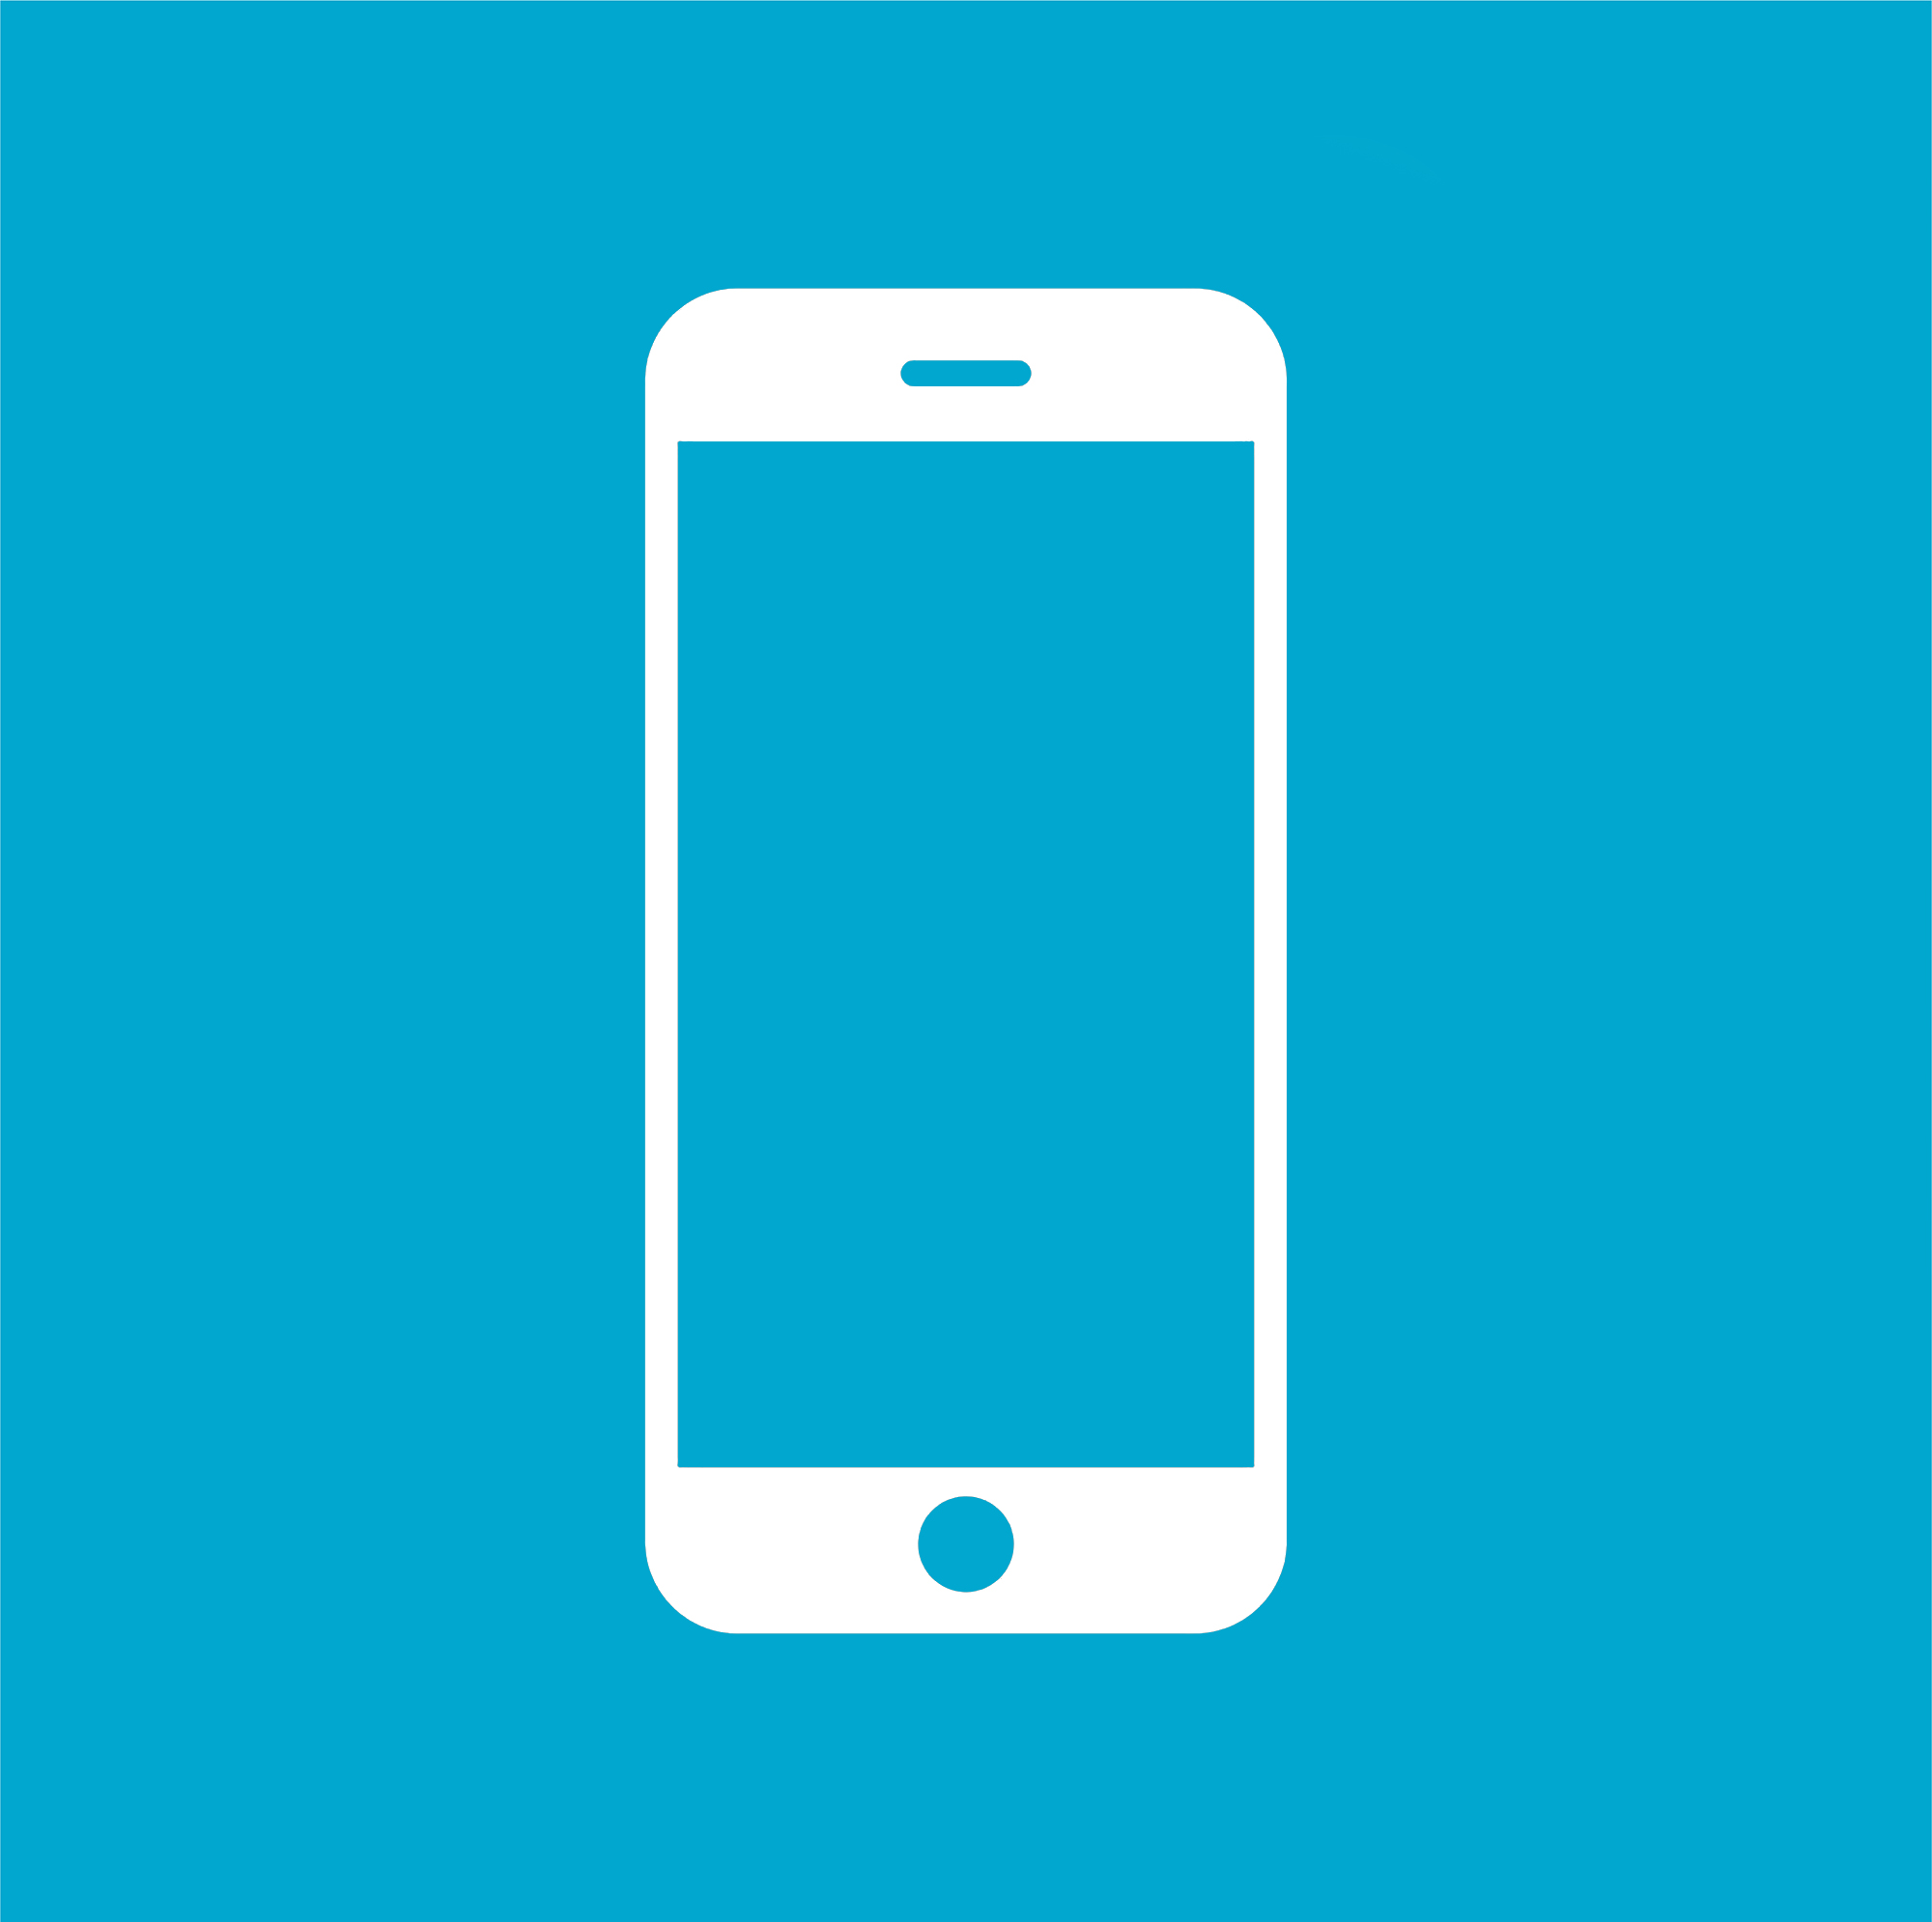 Blue and white image of a mobile phone outline.